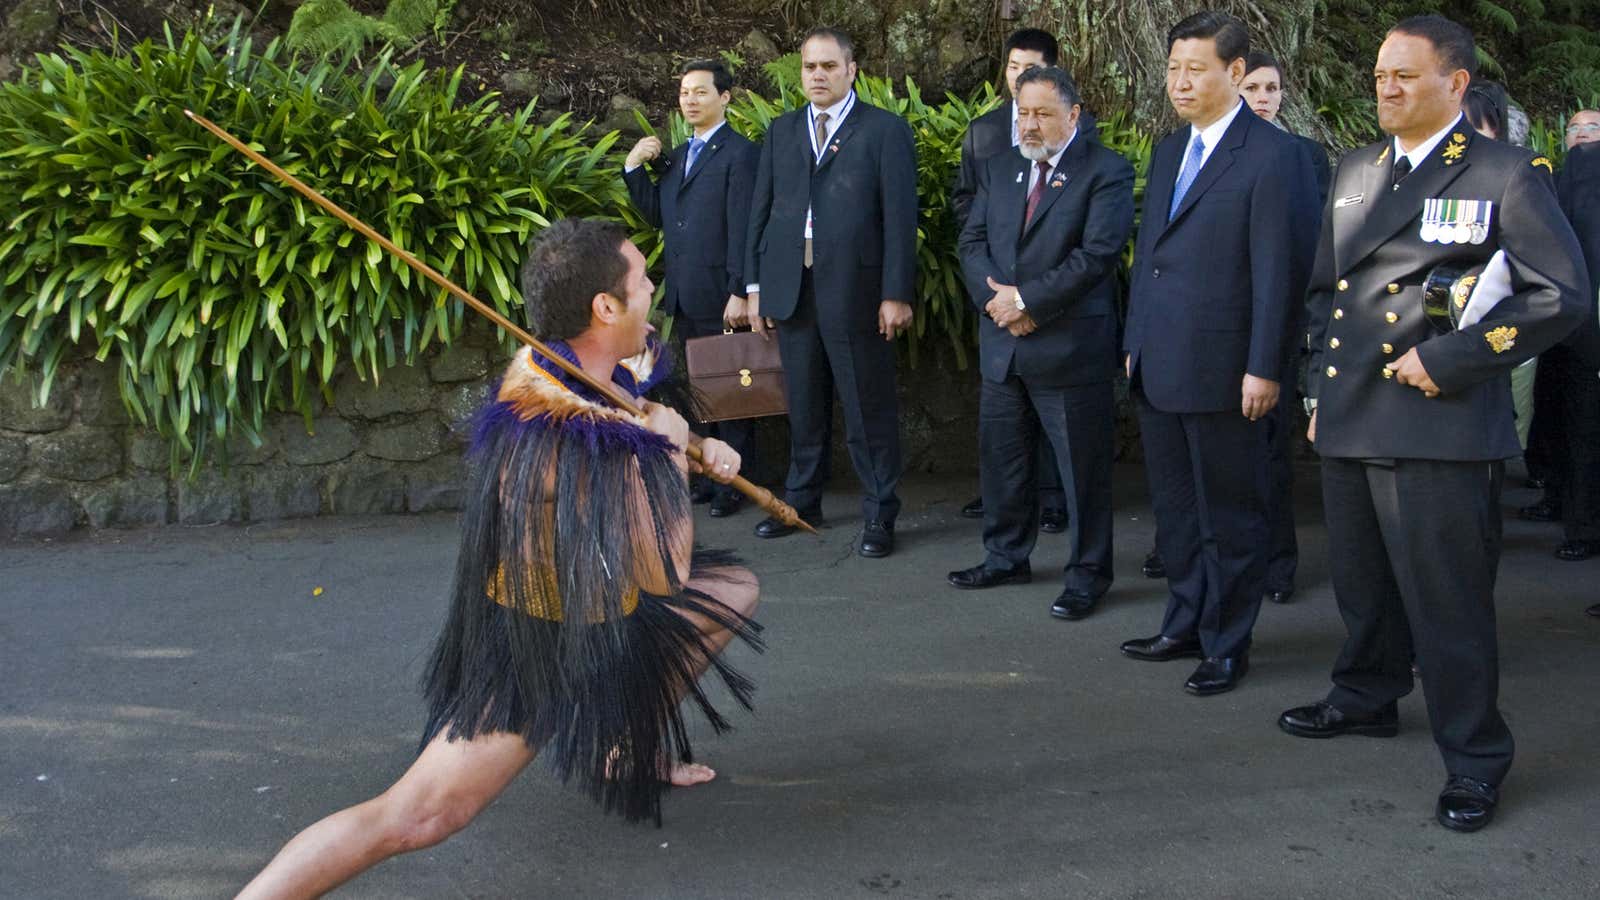 Then Vice President Xi Xinping—the current president of the People’s Republic—got a taste of Maori hospitality on a visit to New Zealand in 2010.